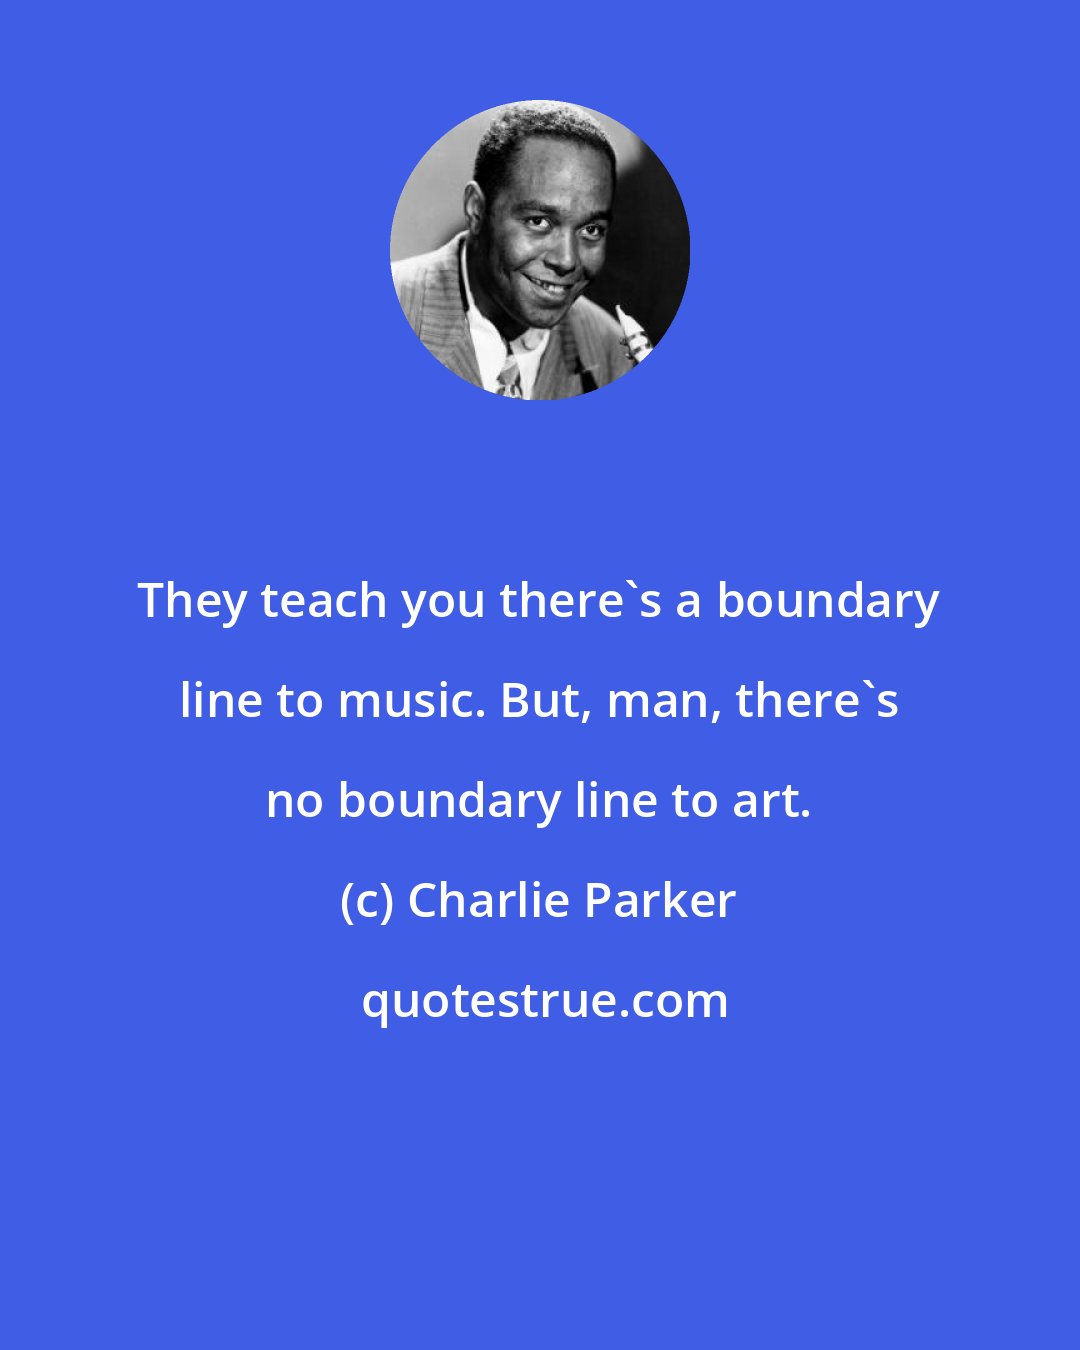 Charlie Parker: They teach you there's a boundary line to music. But, man, there's no boundary line to art.